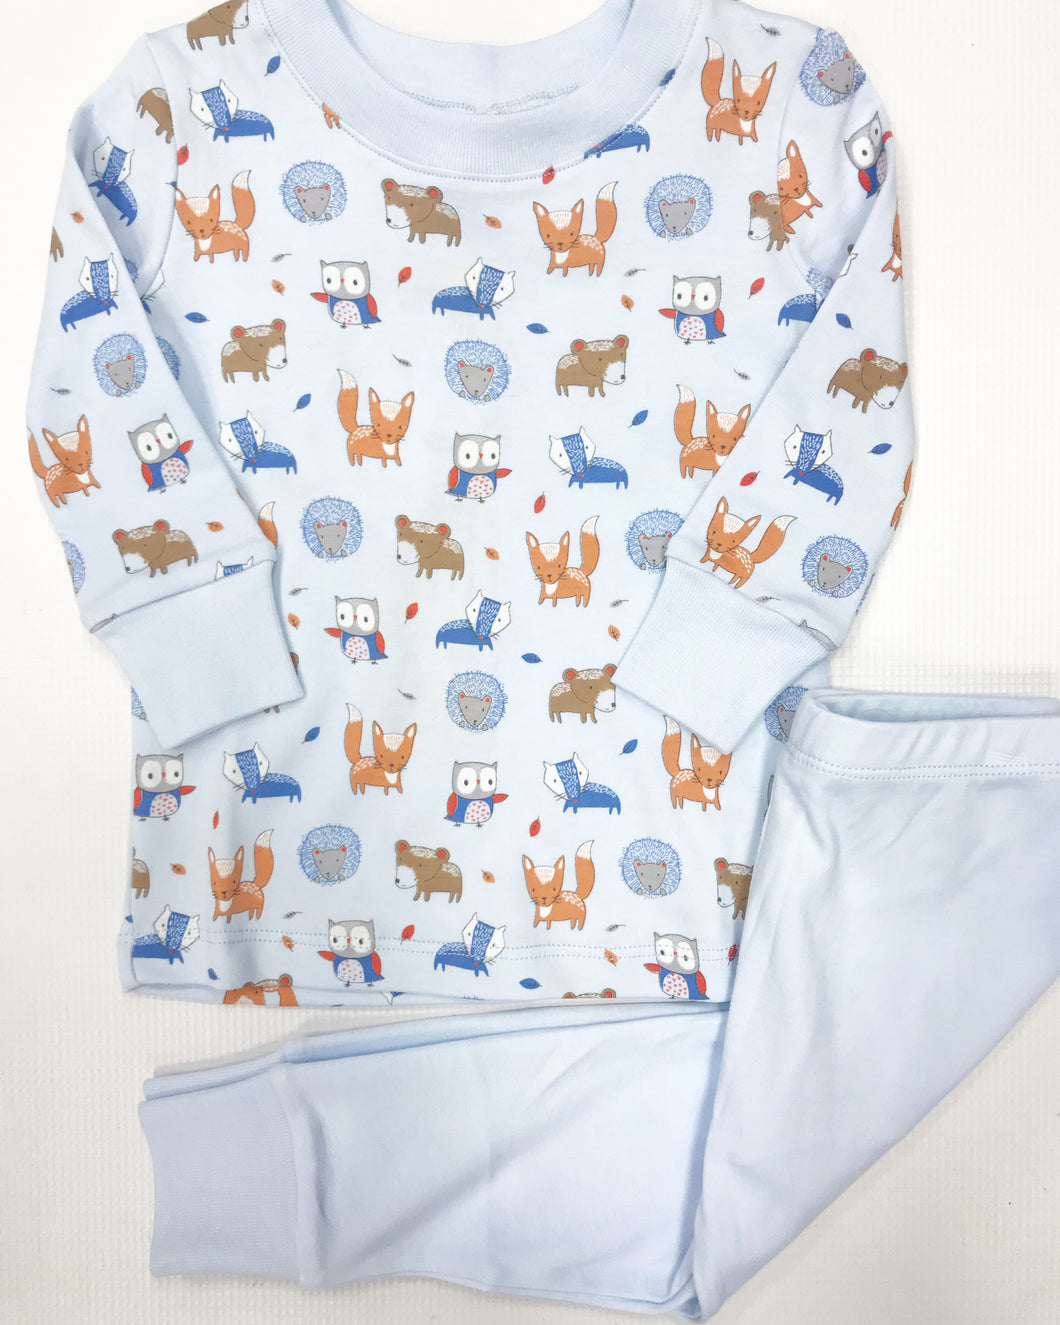 Forrest Critters Pajama Set